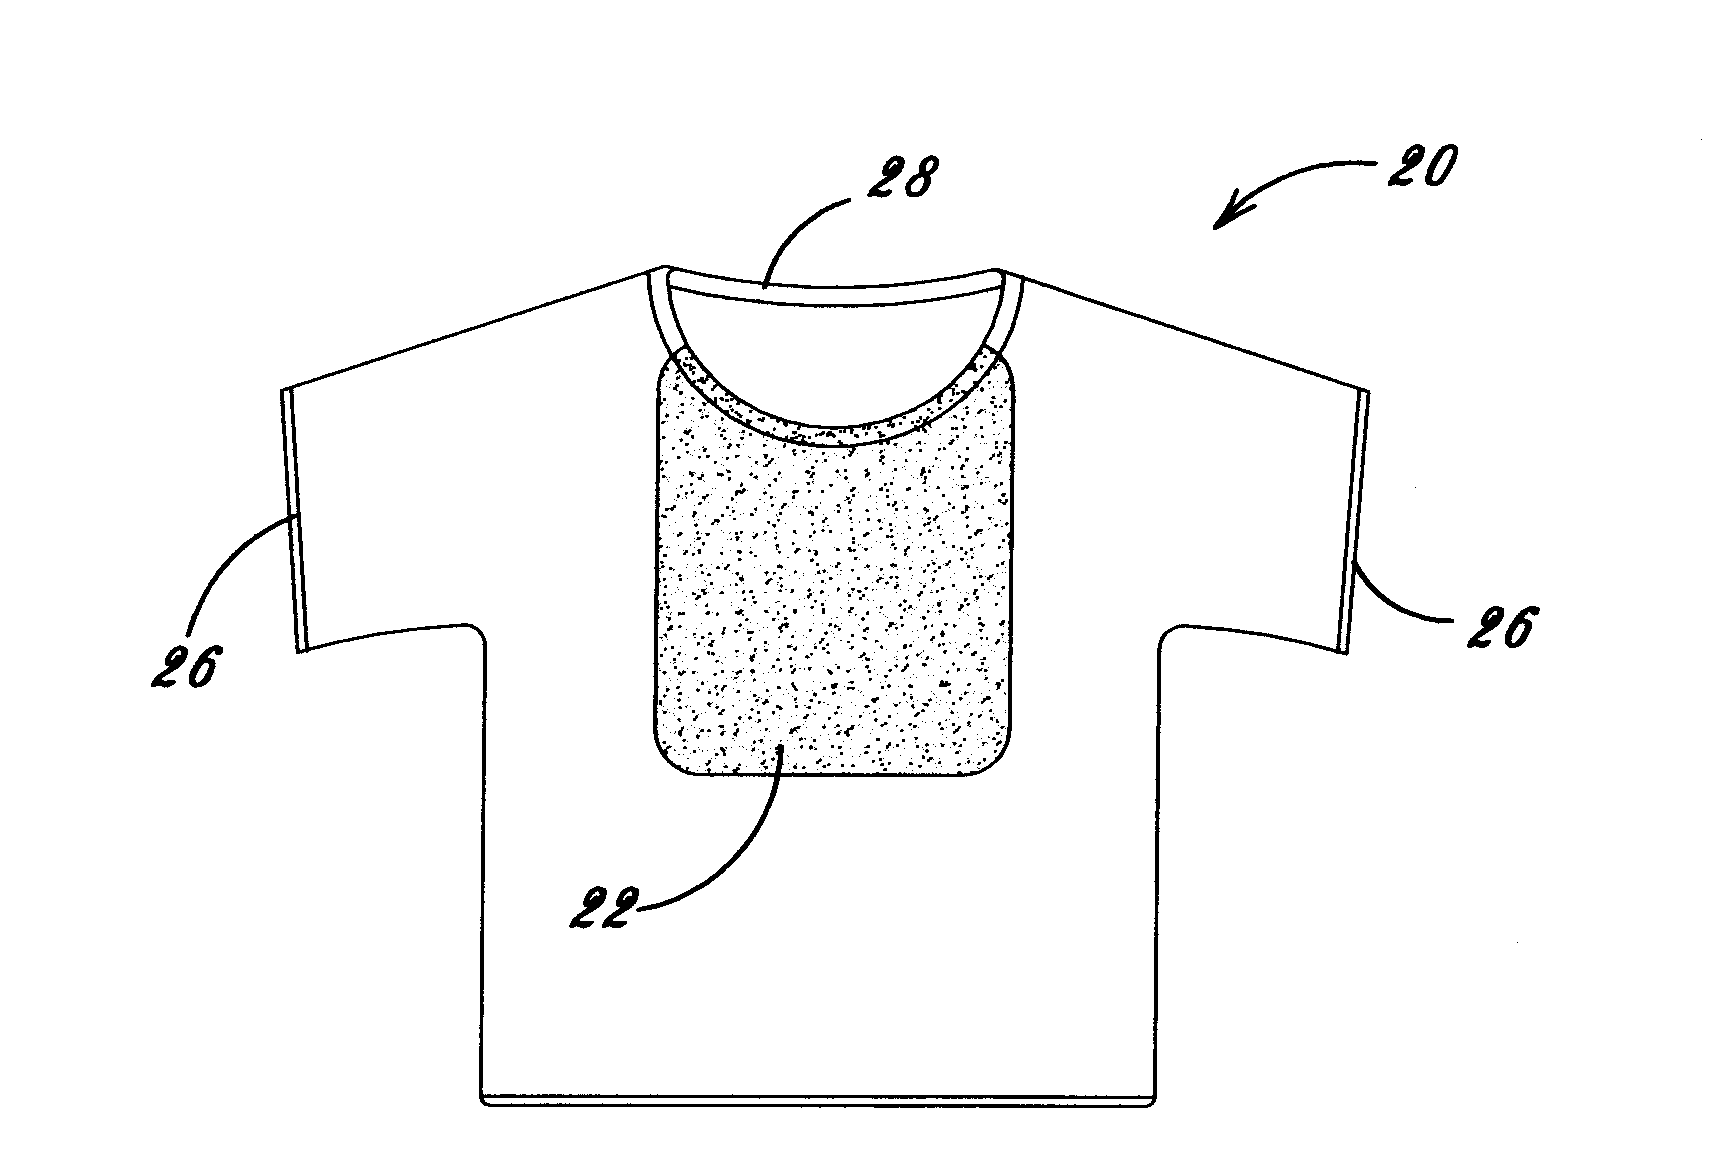 Permanently Embedded Protective Covering for Articles of Clothing